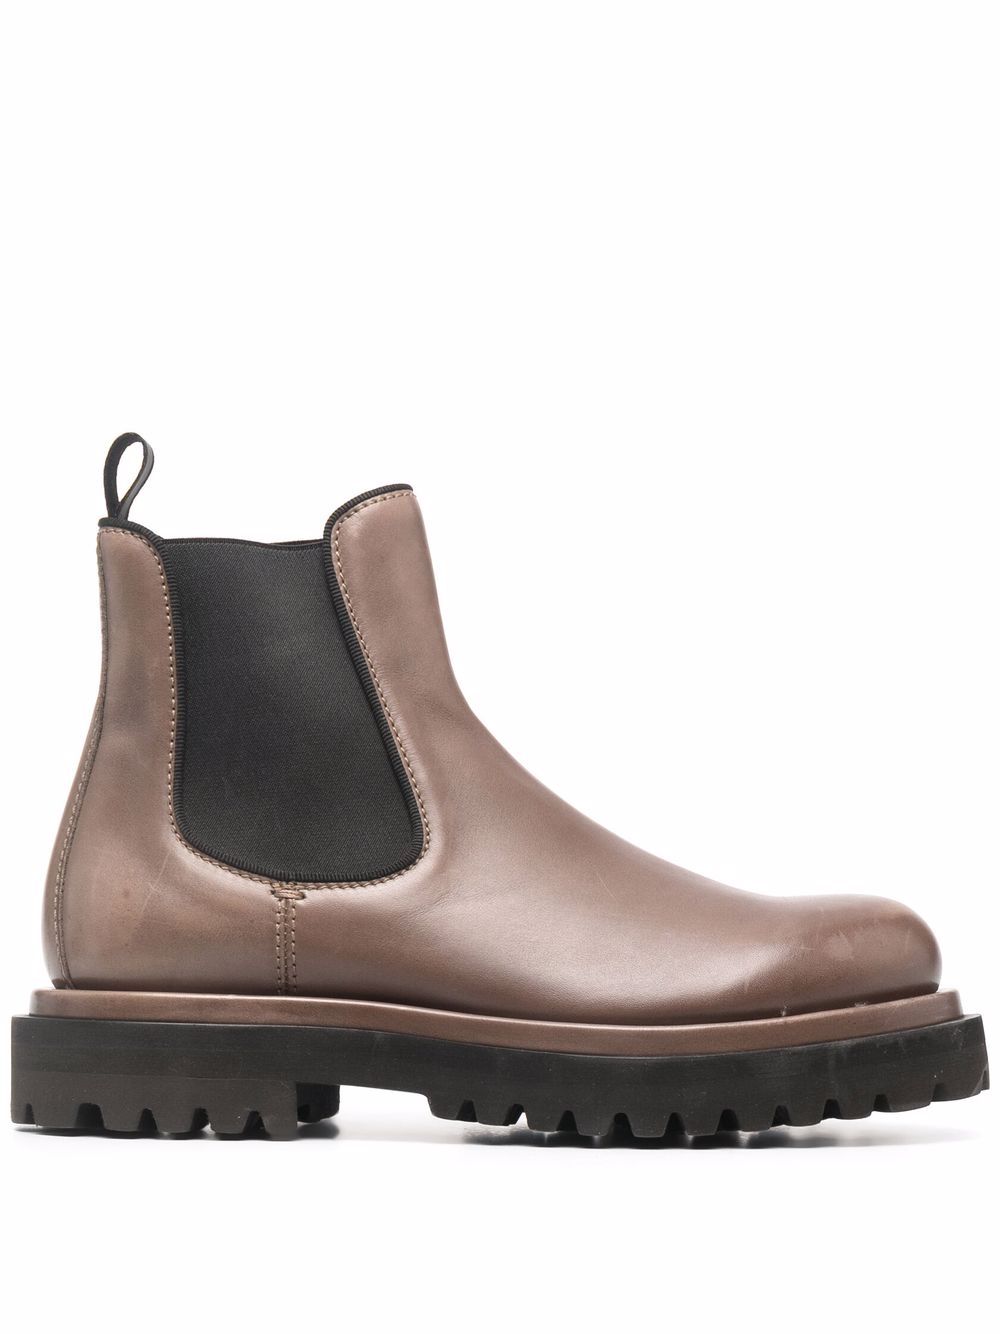 Image 1 of Officine Creative Wisal 006 leather boots